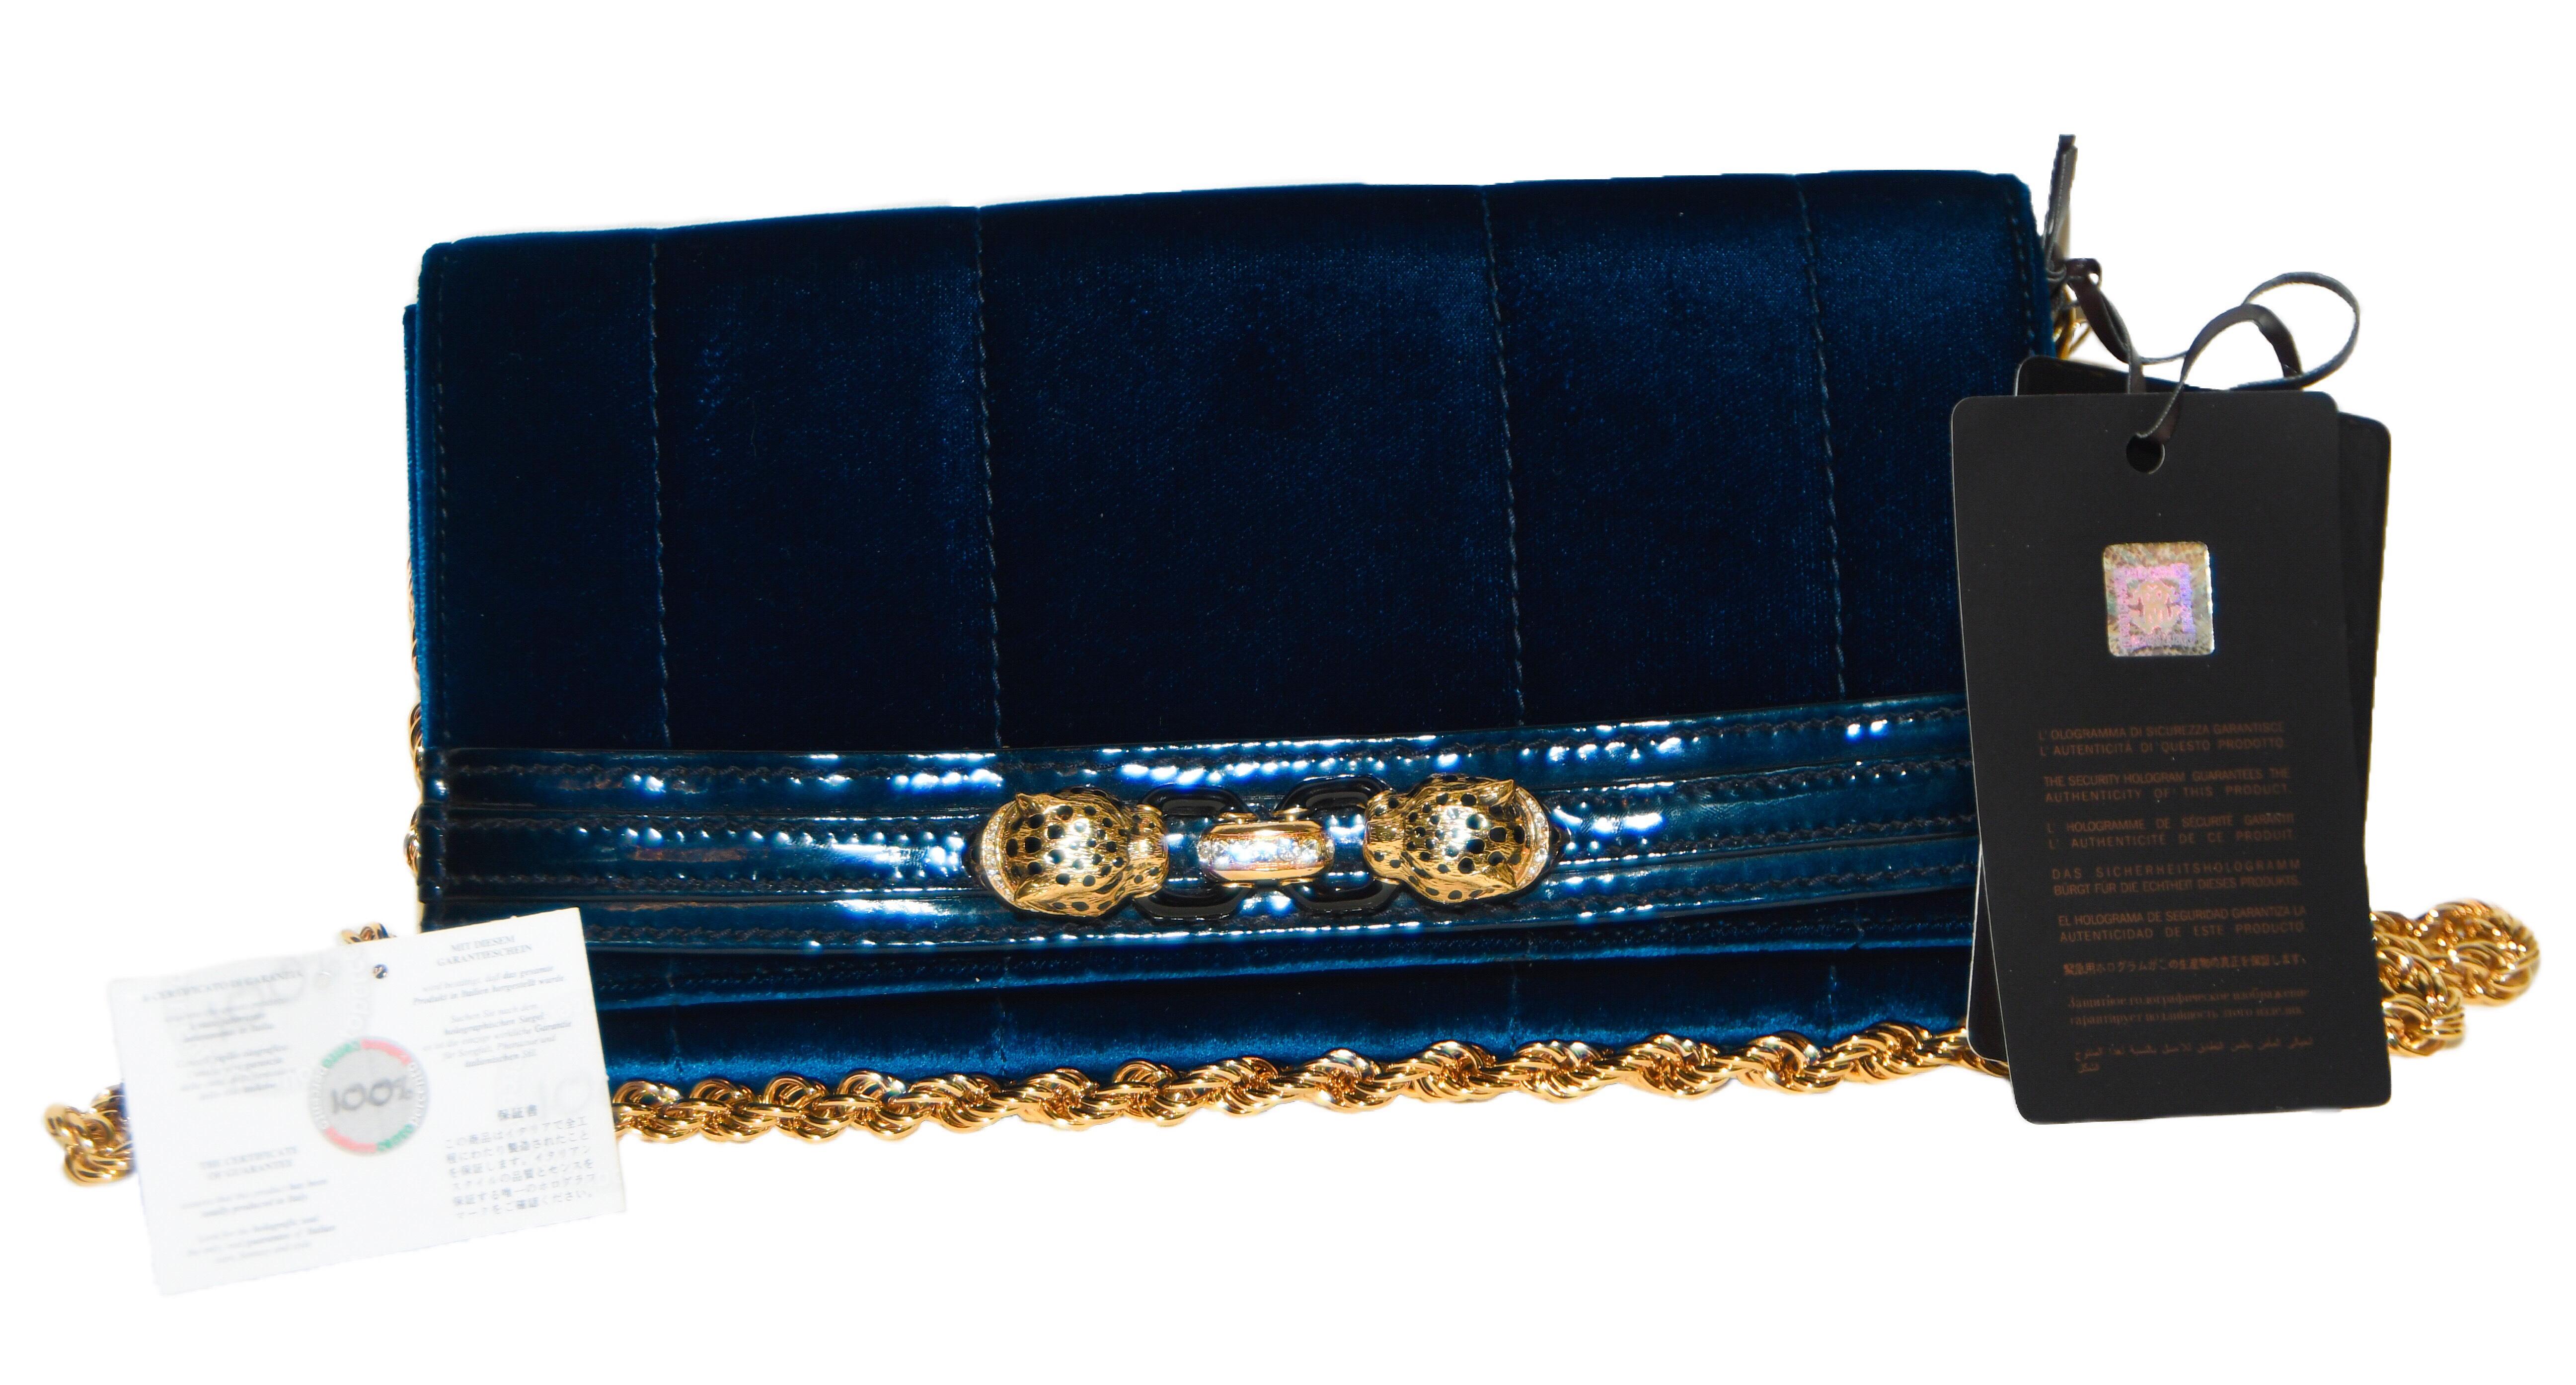 This Roberto Cavalli piece is designed to carry your daily essentials or evening belongings in ease and style. This pochette is created with a mix of fine fabrics and leathers.  Delicately layered in blue velvet and patent leather with two leopard